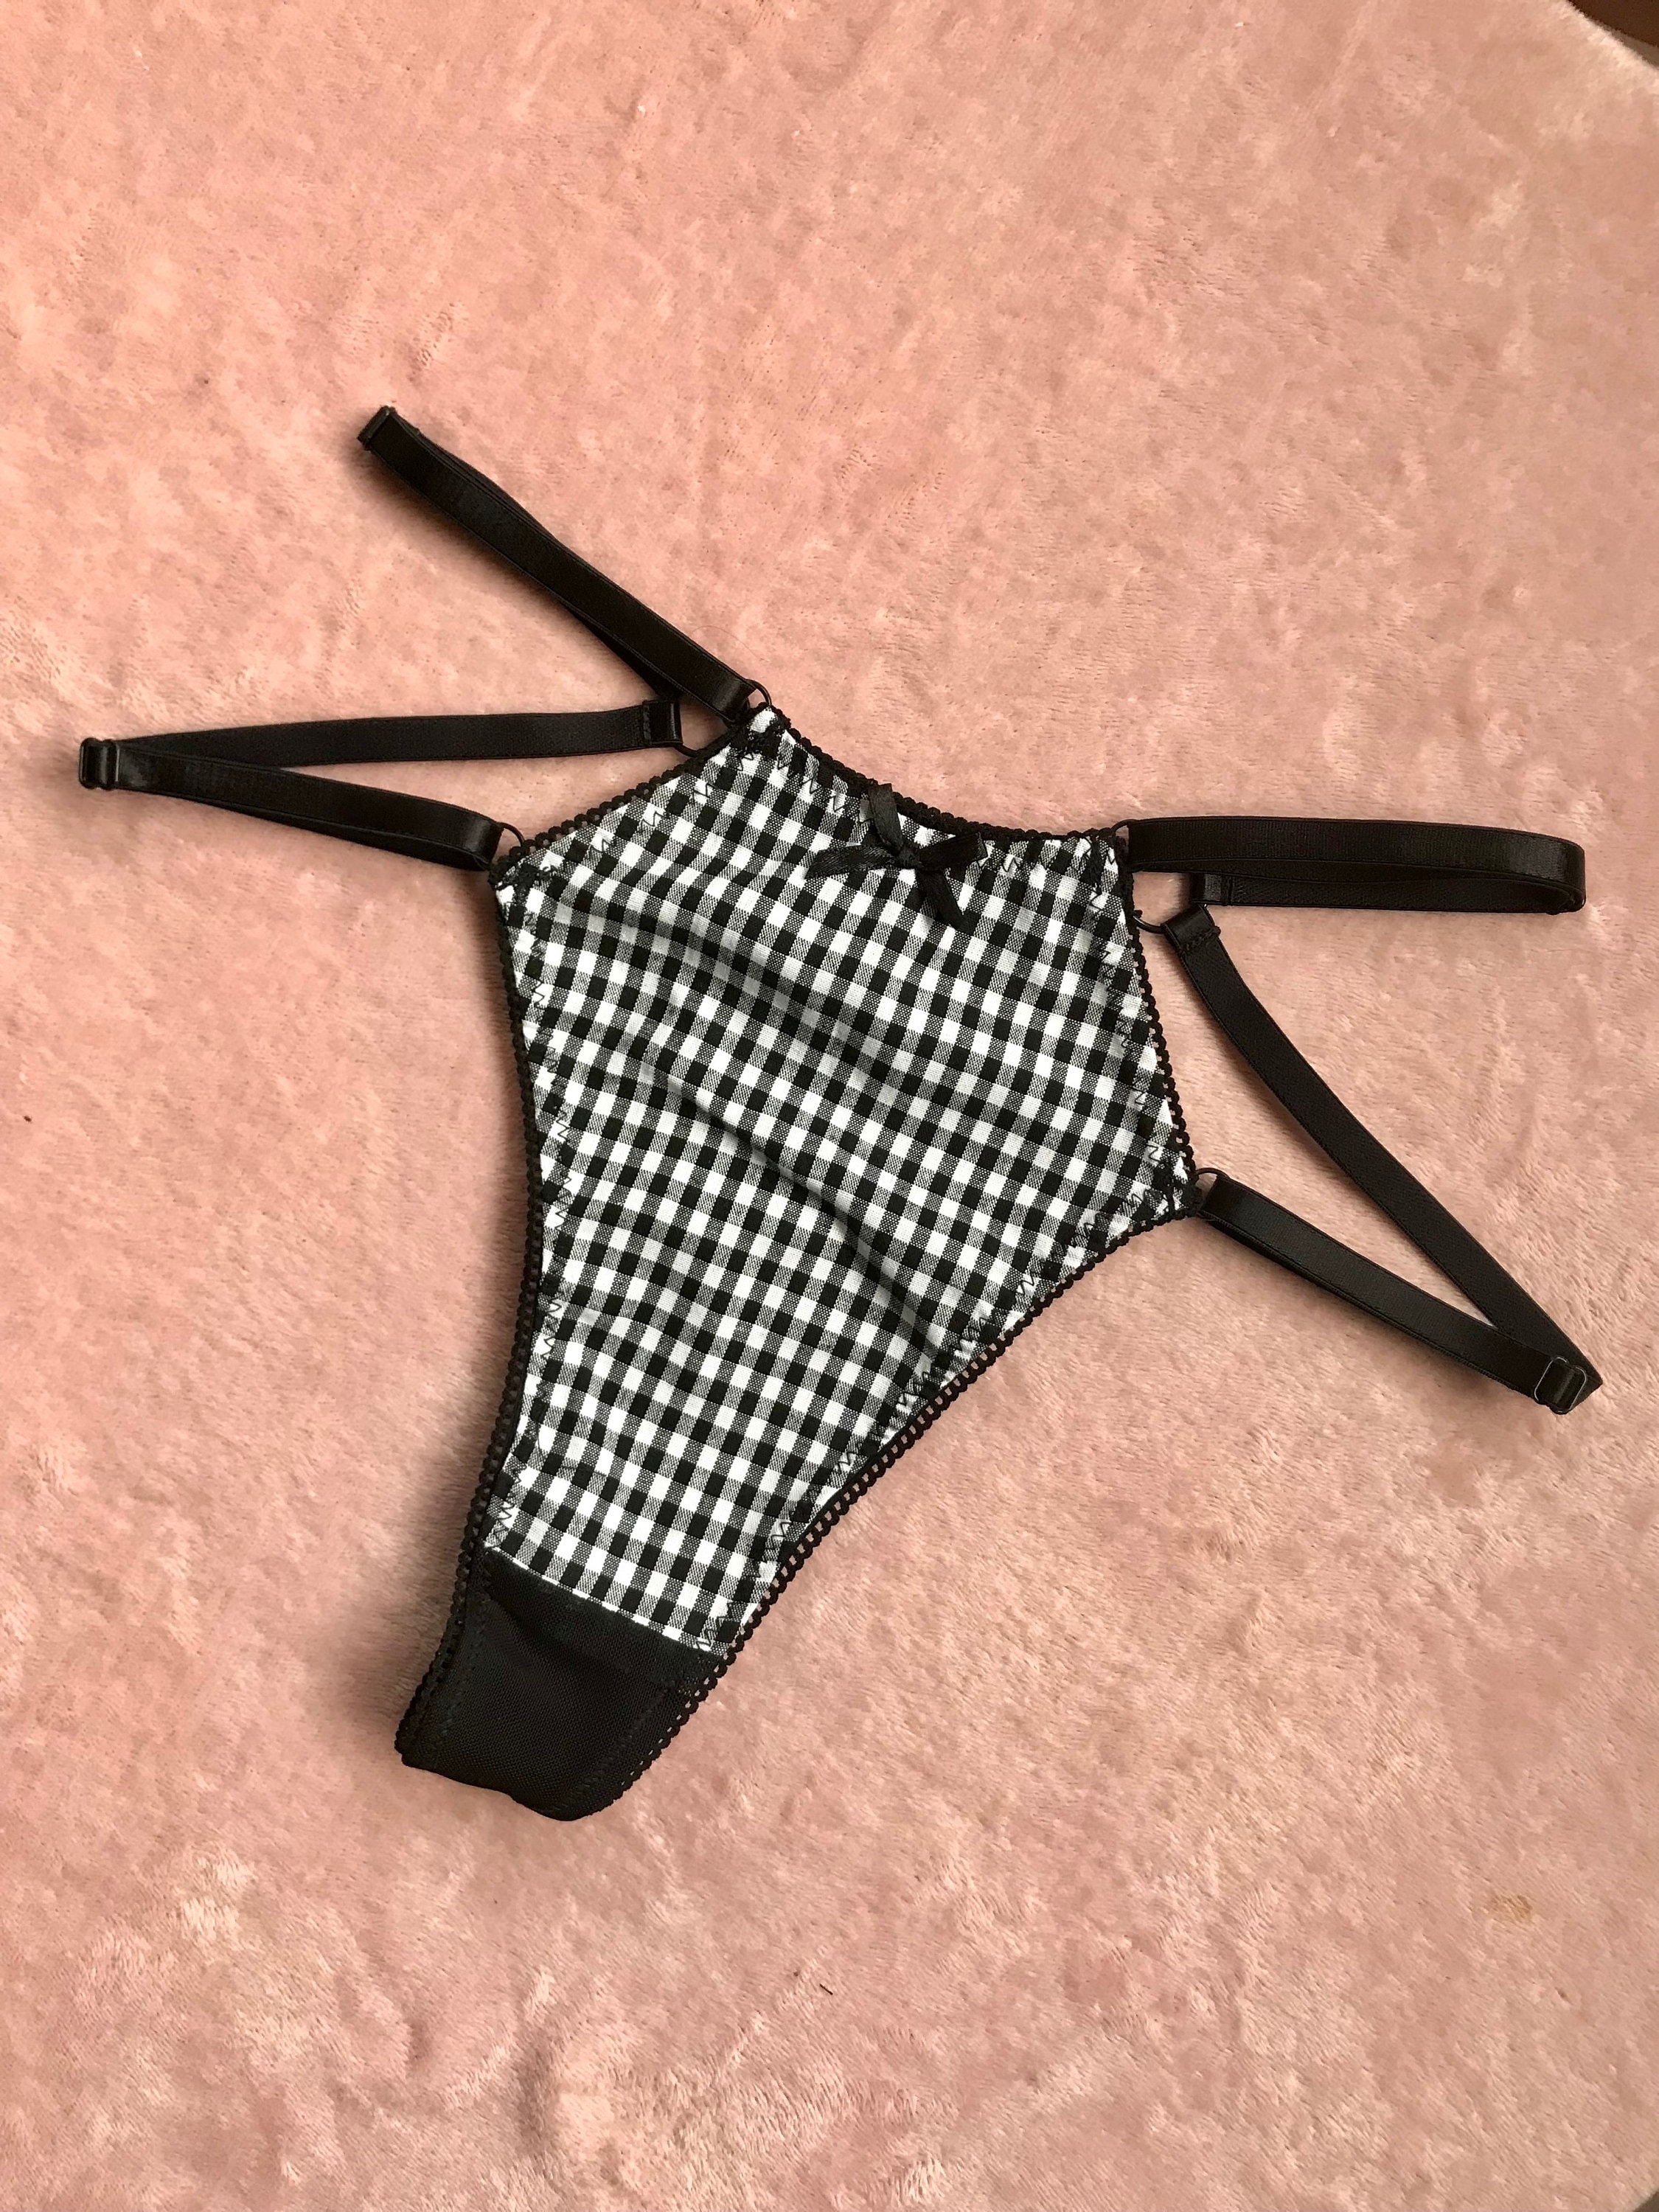 Suggestive Thong Panty, Slip Into My Cockpit Thong Lingerie